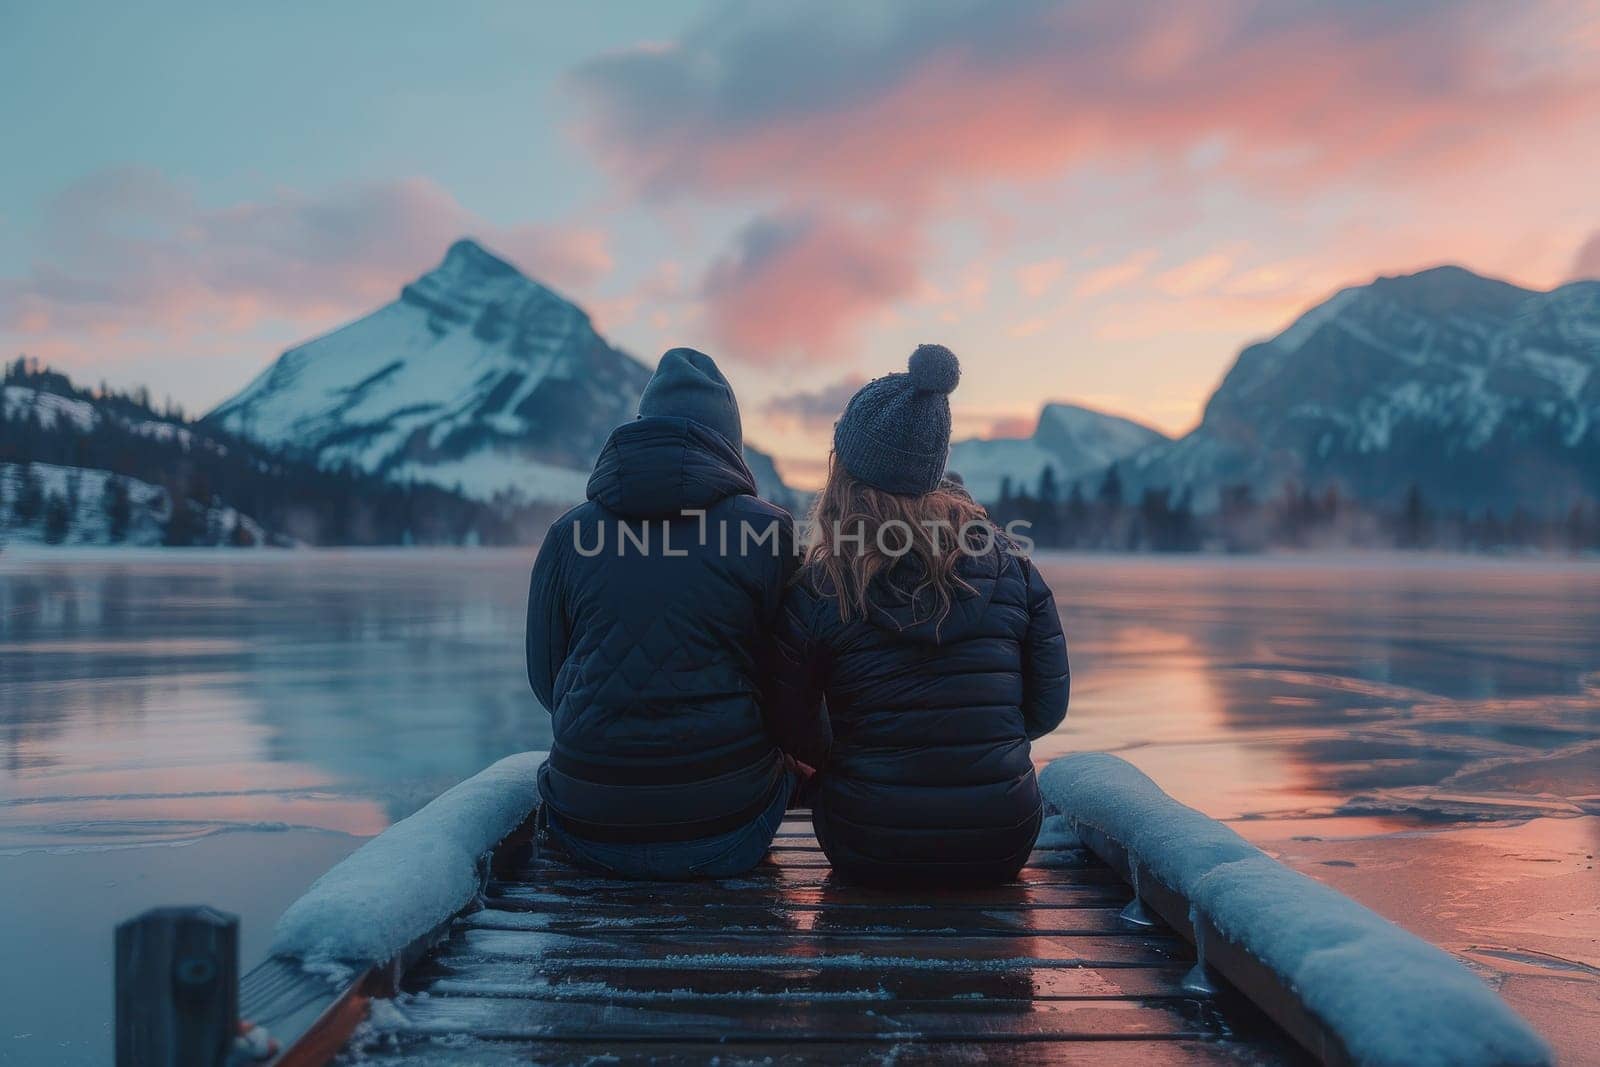 A couple is sitting on a dock overlooking a lake. The man is wearing a black jacket and the woman is wearing a blue jacket. The sky is orange and the mountains in the background are covered in snow